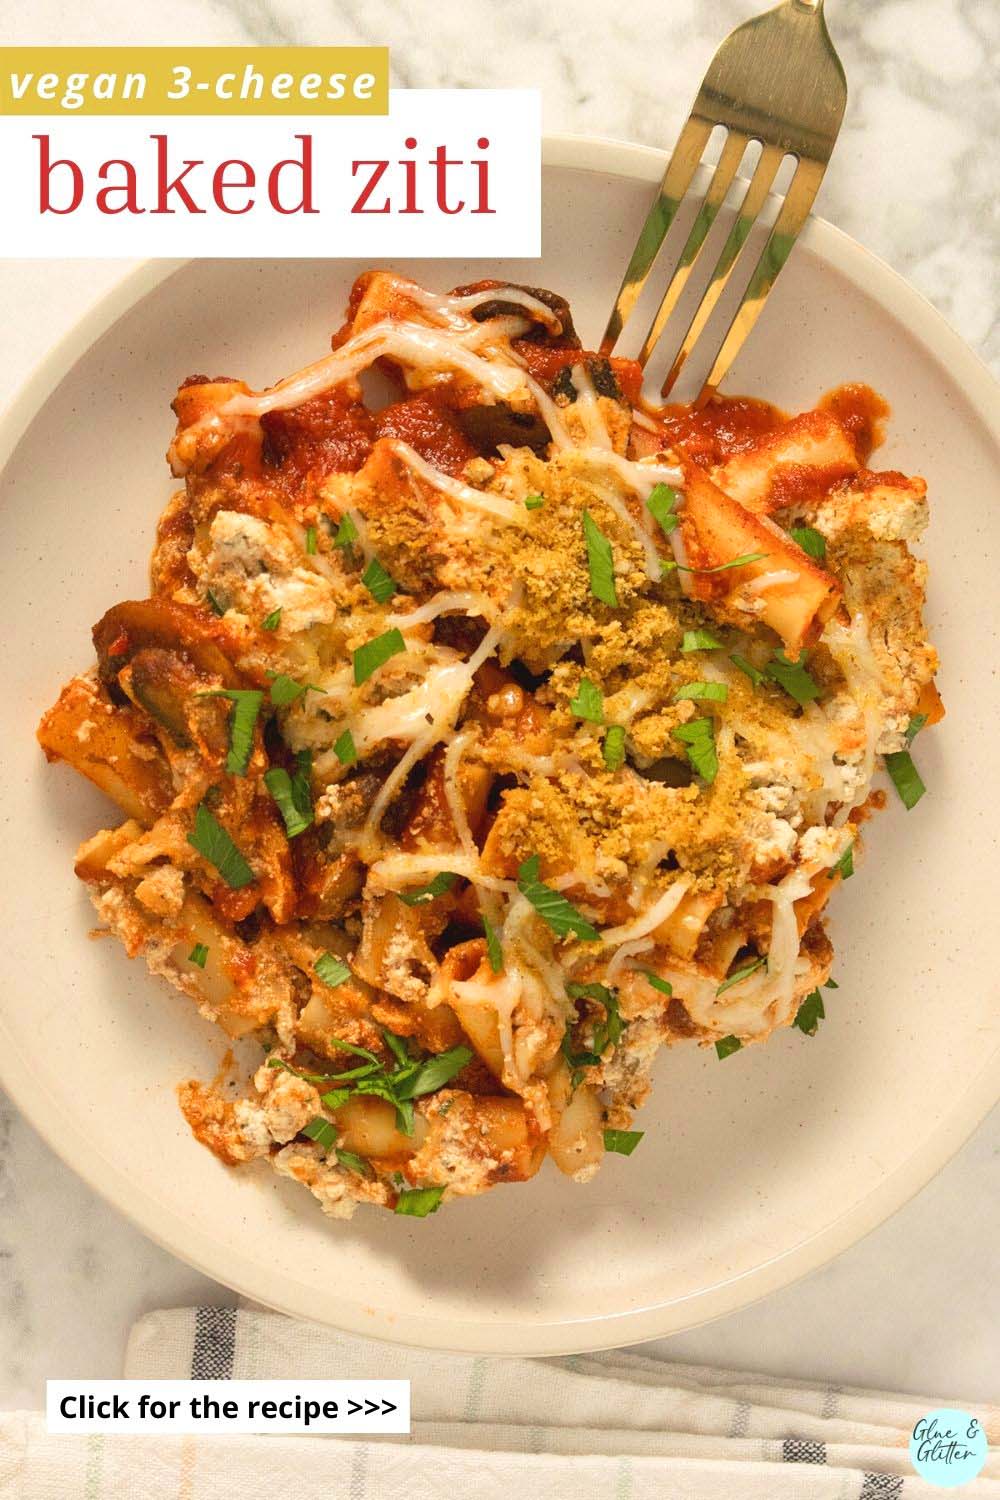 vegan baked ziti on a plate with a fork, text overlay